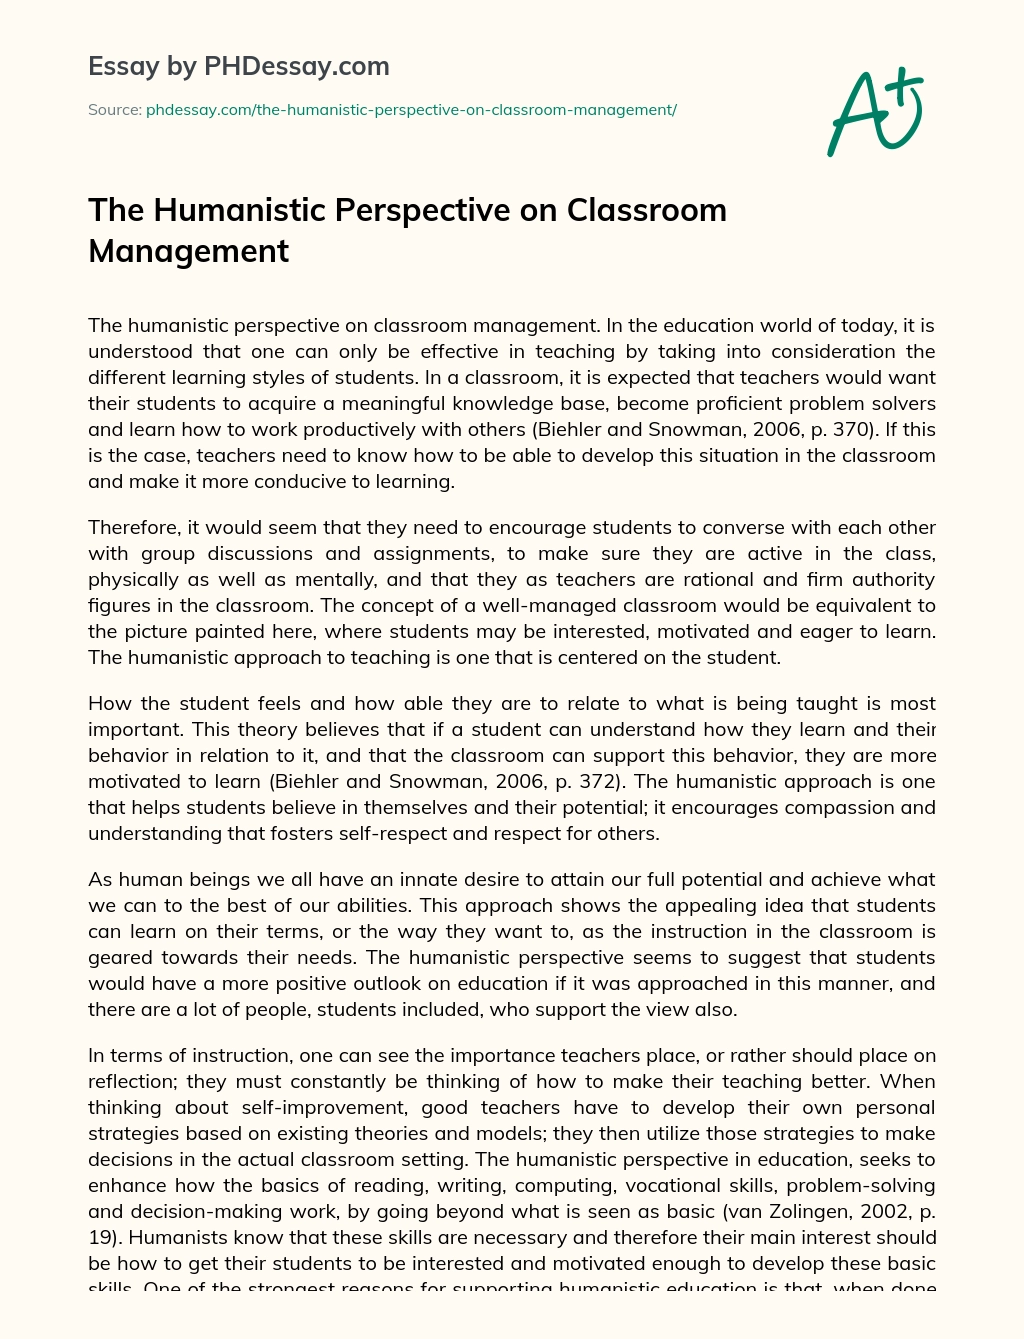 The Humanistic Perspective on Classroom Management essay